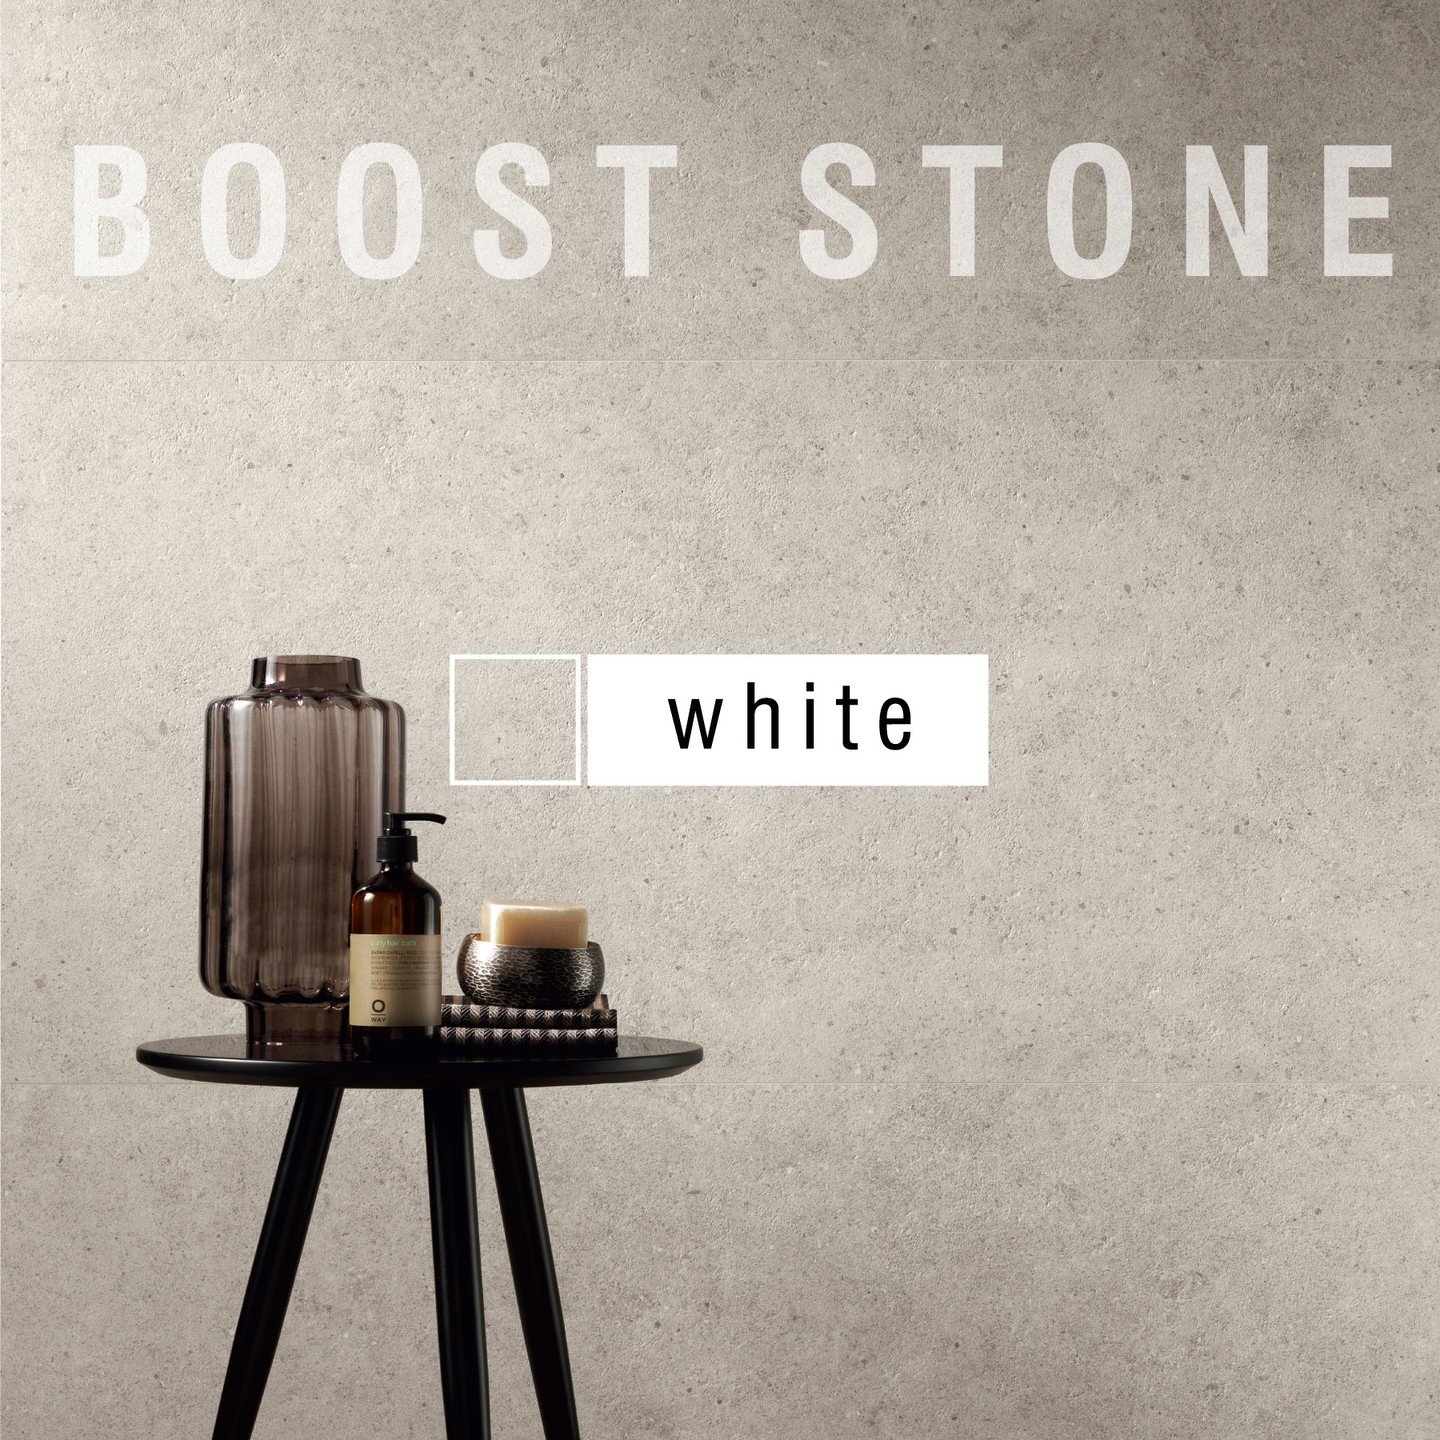 New at Julian Tile. Boost Stone is the collection of porcelain floor and wall tiles conceived to offer the world of design a modern stone effect. Inspired by the limestone rocks extracted from the quarries of the Pyrenees and produced in a range of n